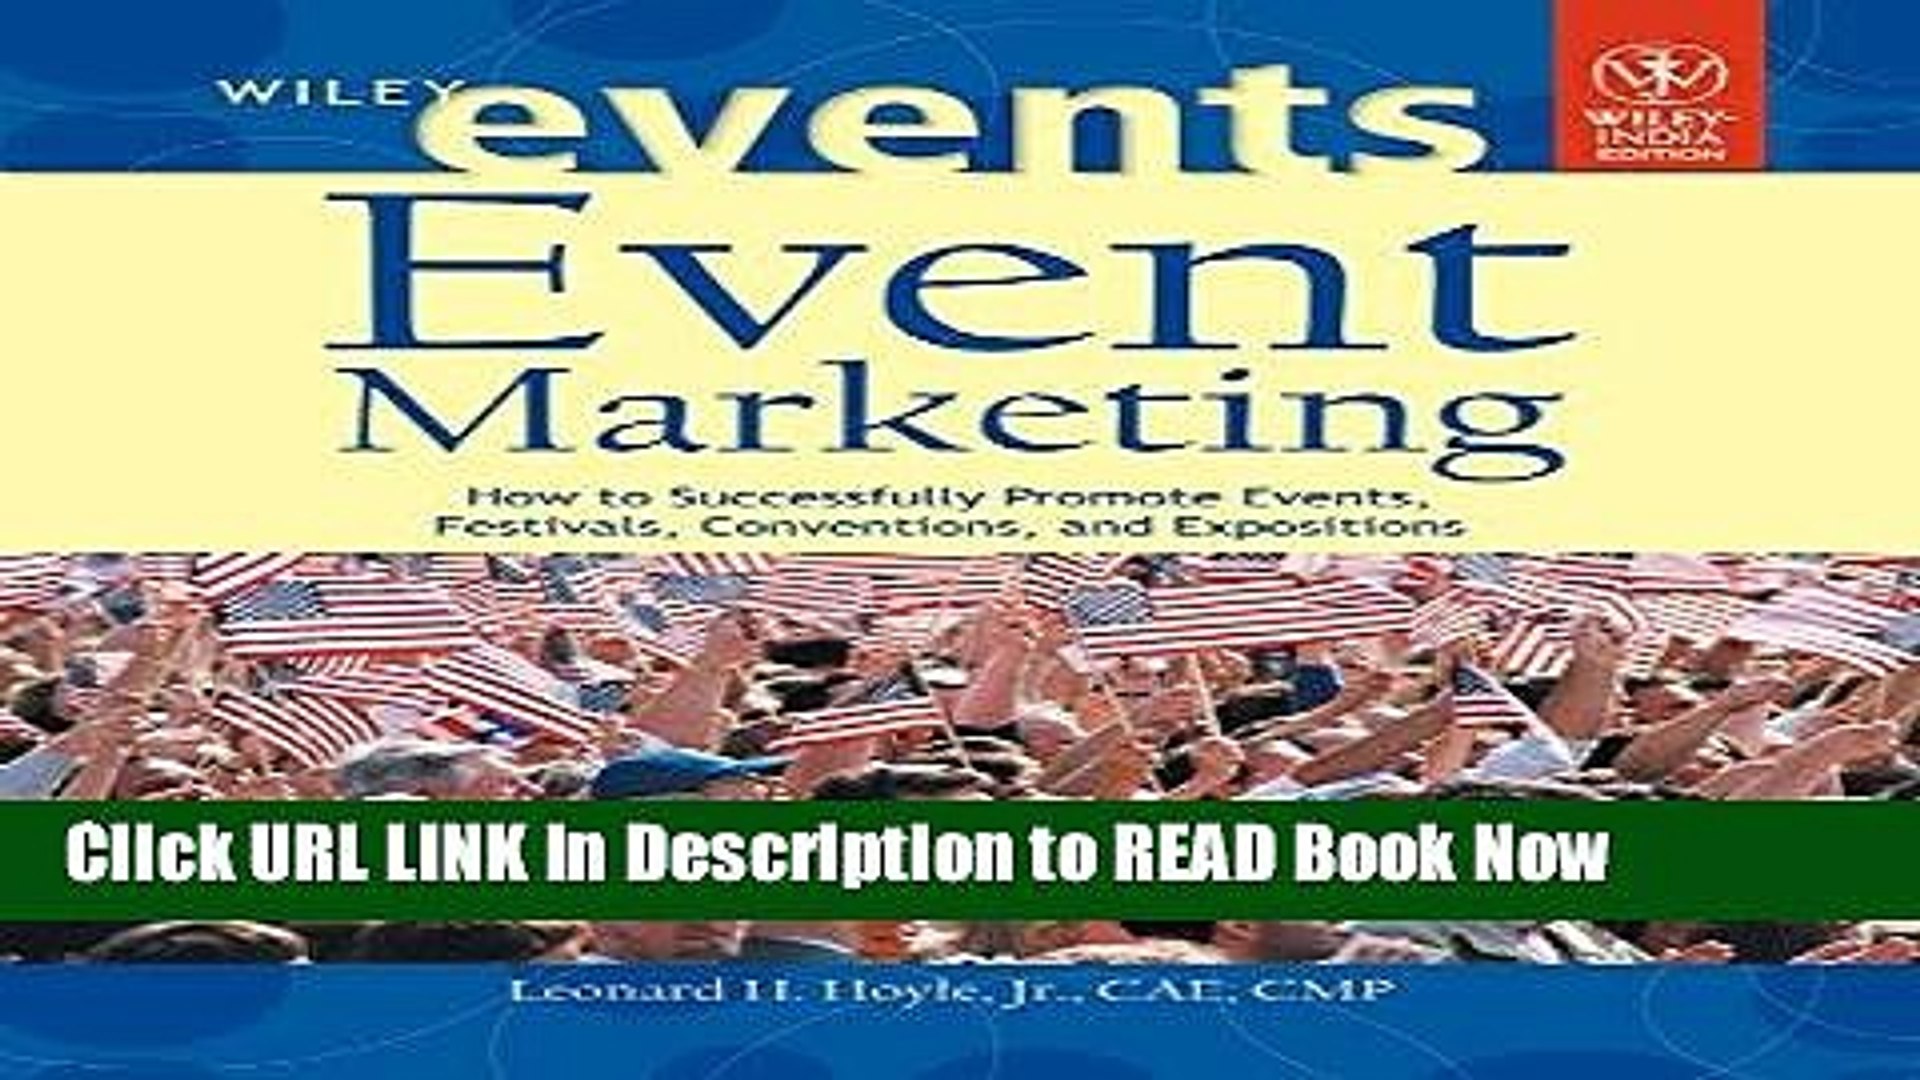 [Reads] Event Marketing: How to Successfully Promote Events, Festivals, Conventions, and